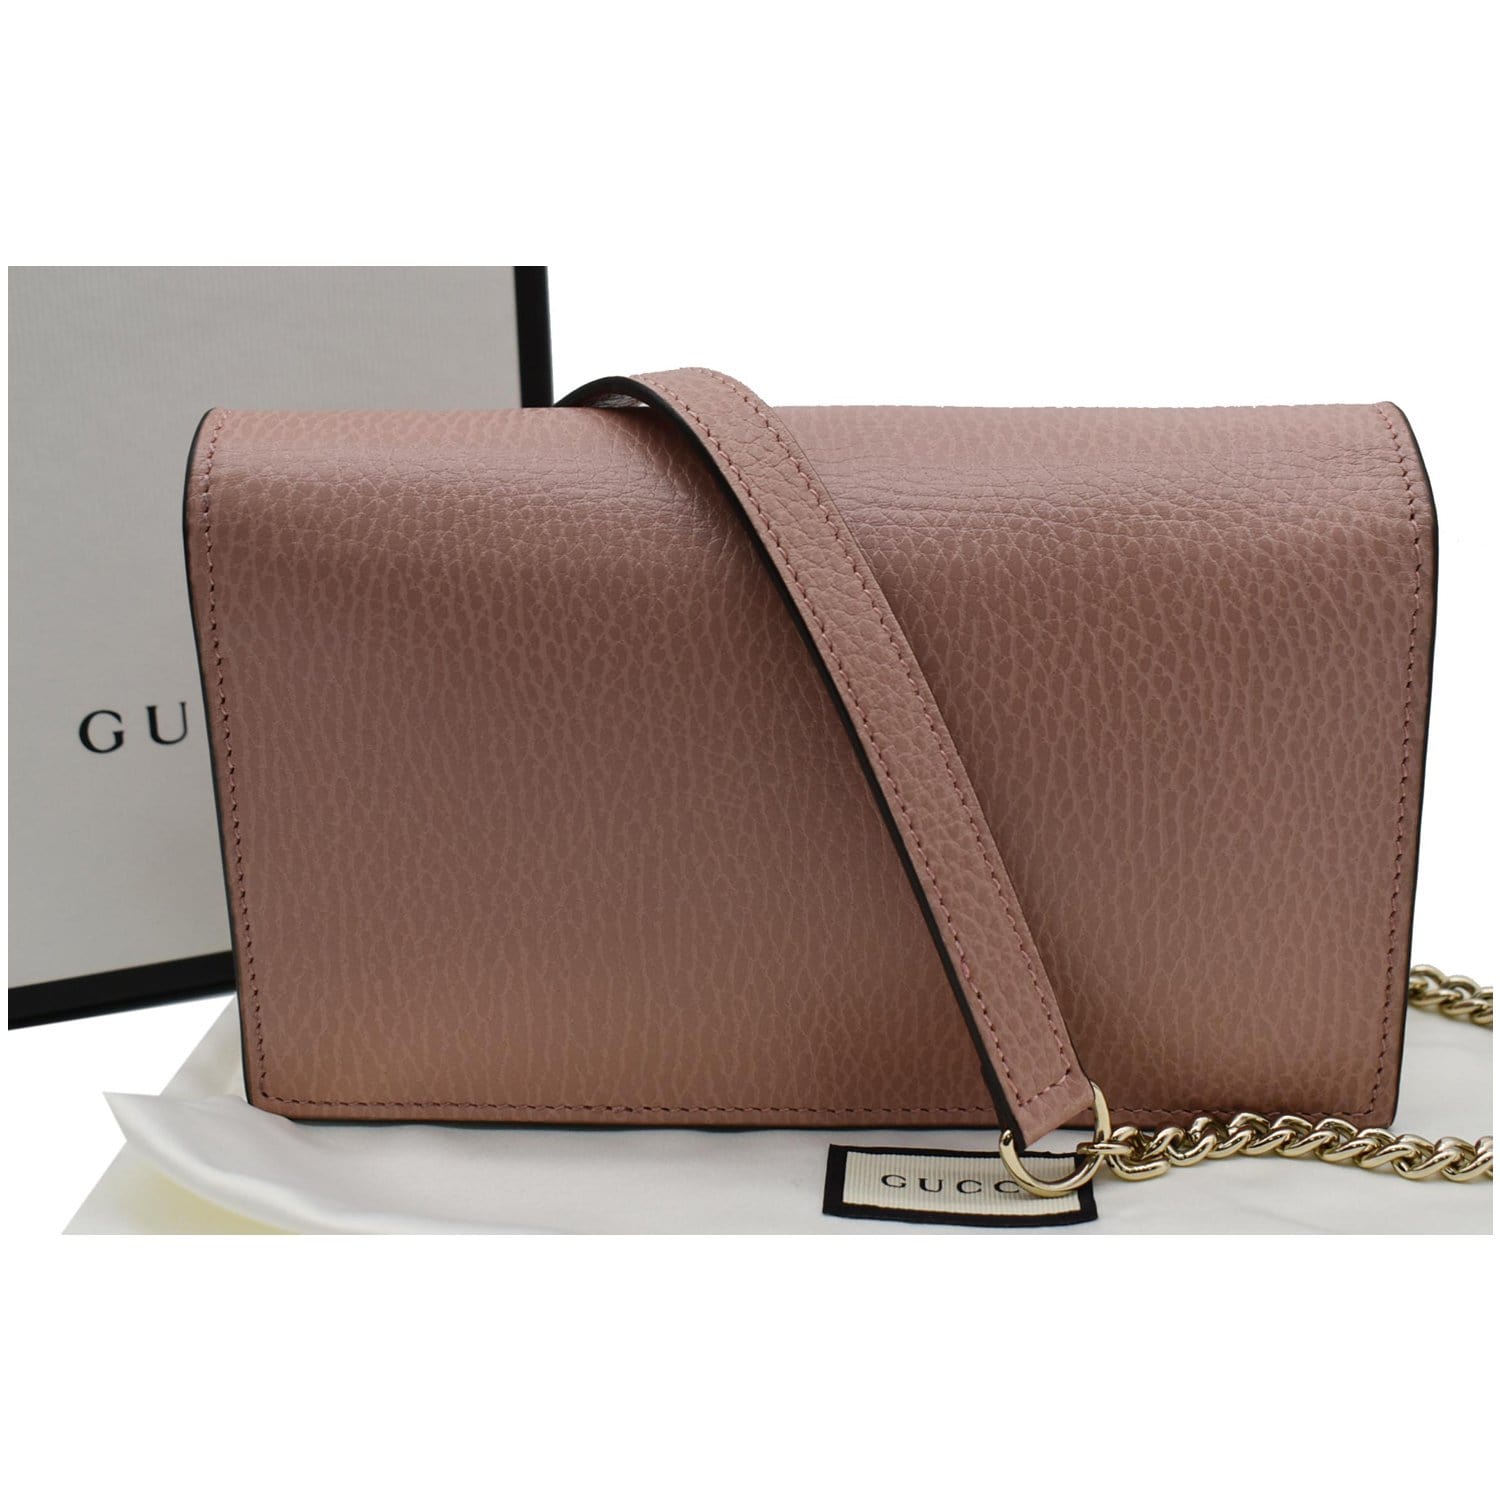 GUCCI-Interlocking-G-Leather-Chain-Wallet-WOC-Gray-510314 – dct